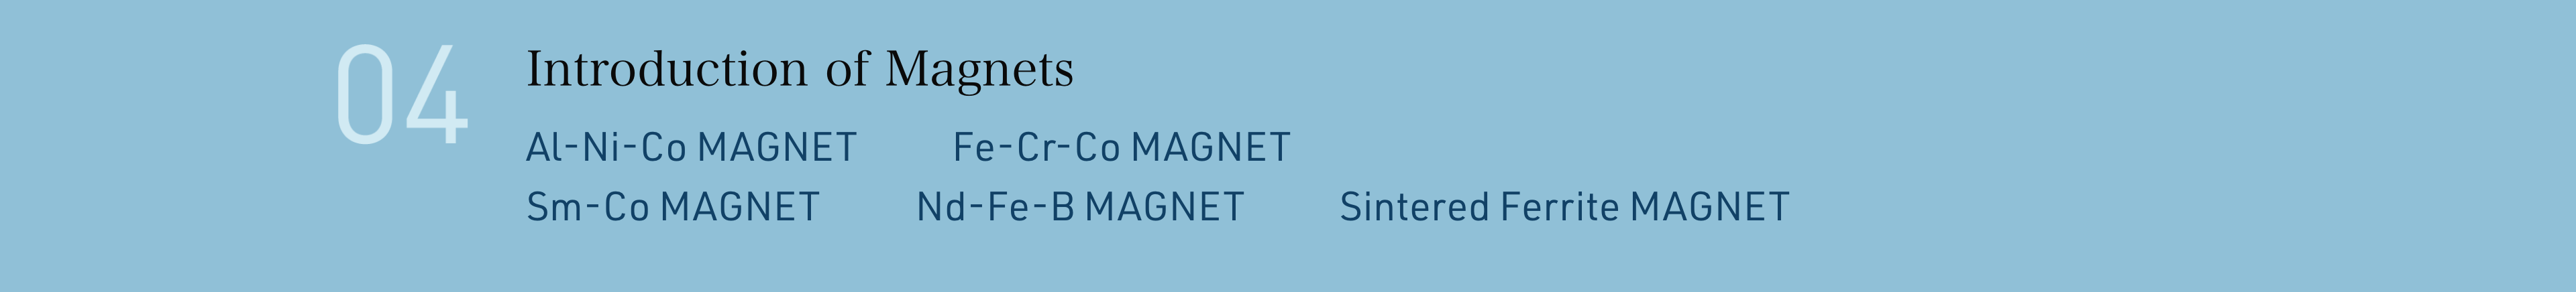 Introduction of Magnets